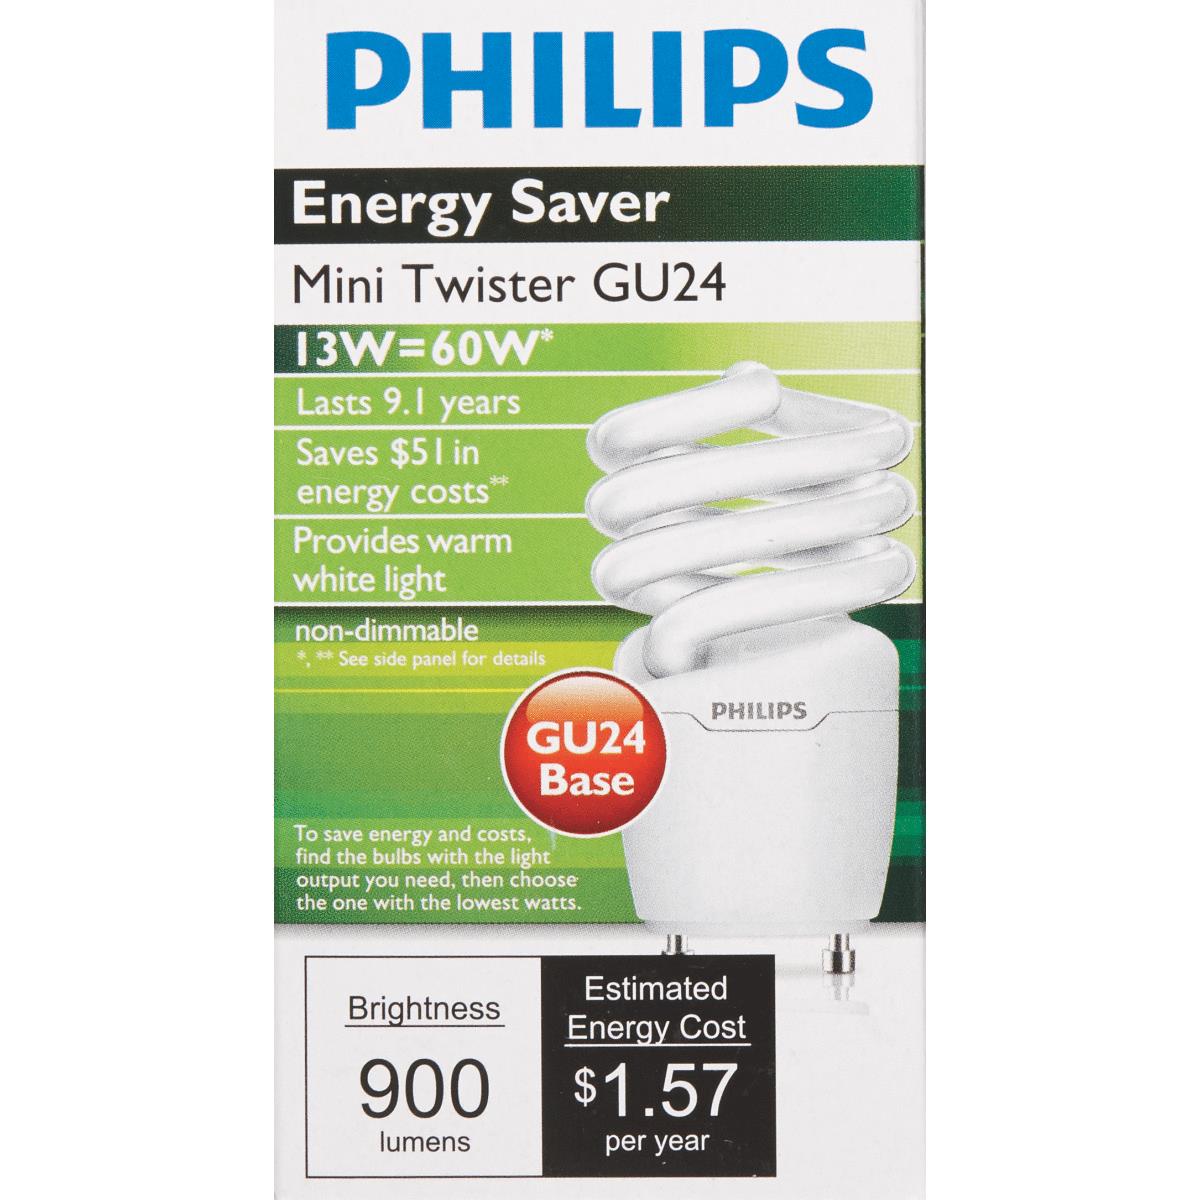 Philips Energy Saver EL/mdTQS - Non-integrated compact fluorescent light bulb - shape: spiral tube - GU24 - 13 W (equivalent 60 W) - warm white light - 2700 K - image 2 of 2